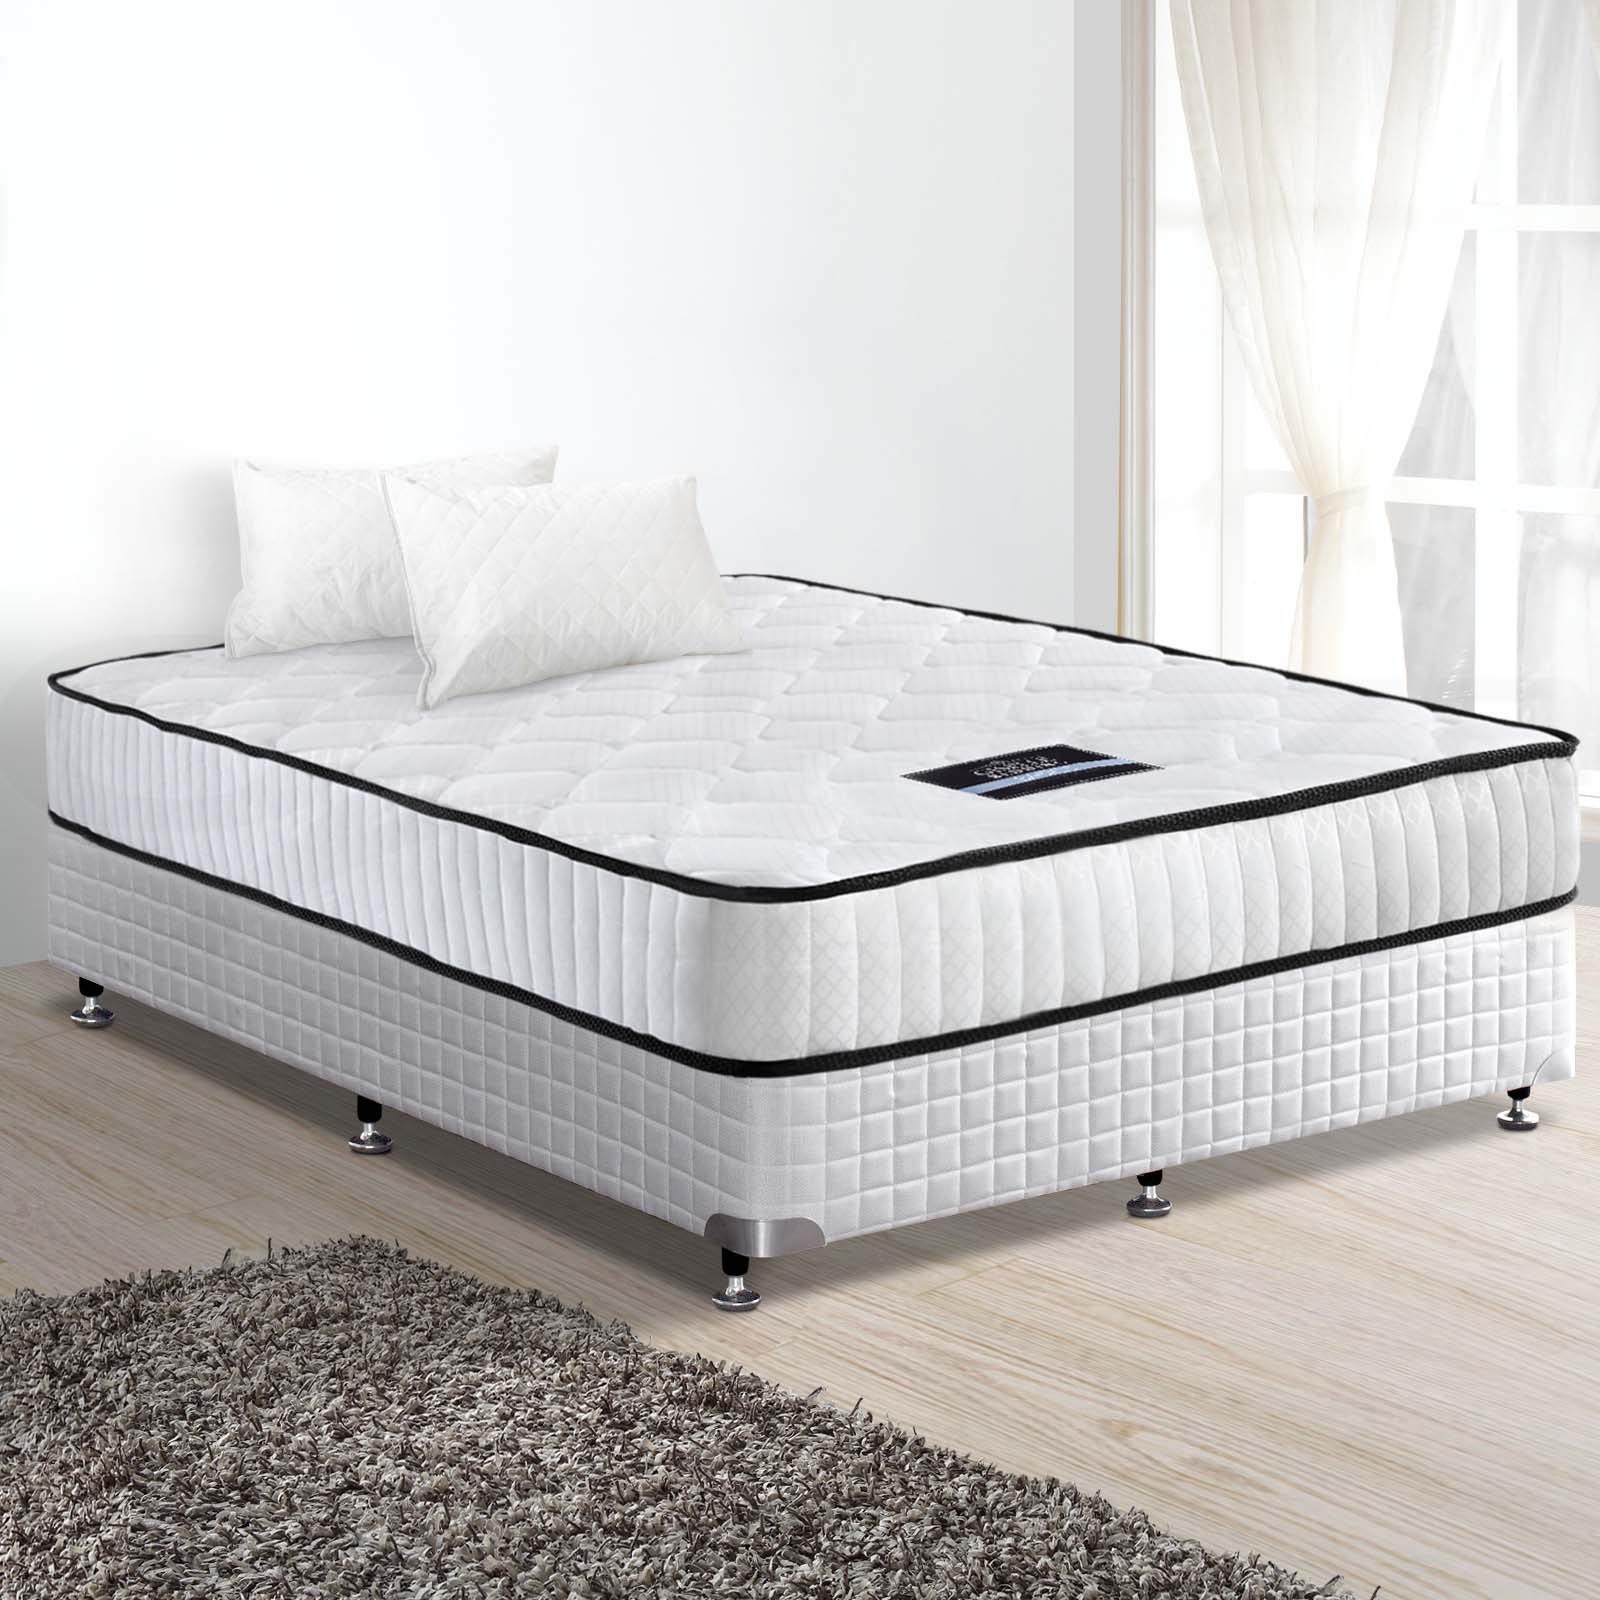 Queen Double King Single Mattress Bed Size Pocket Spring ...